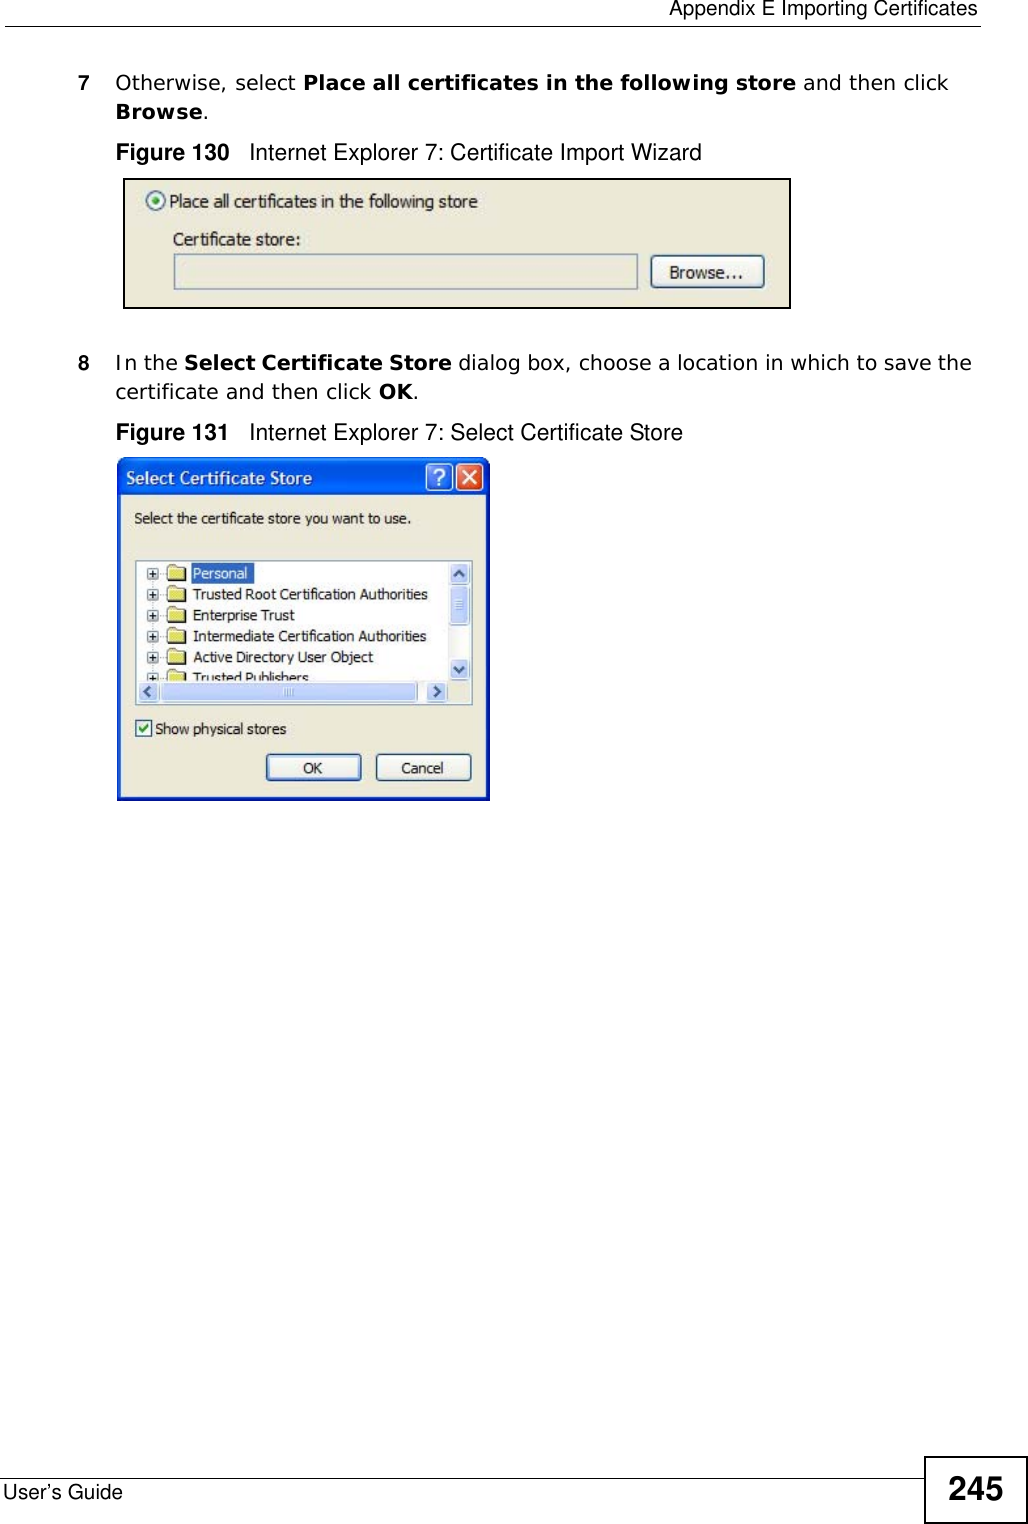  Appendix E Importing CertificatesUser’s Guide 2457Otherwise, select Place all certificates in the following store and then click Browse.Figure 130   Internet Explorer 7: Certificate Import Wizard8In the Select Certificate Store dialog box, choose a location in which to save the certificate and then click OK.Figure 131   Internet Explorer 7: Select Certificate Store